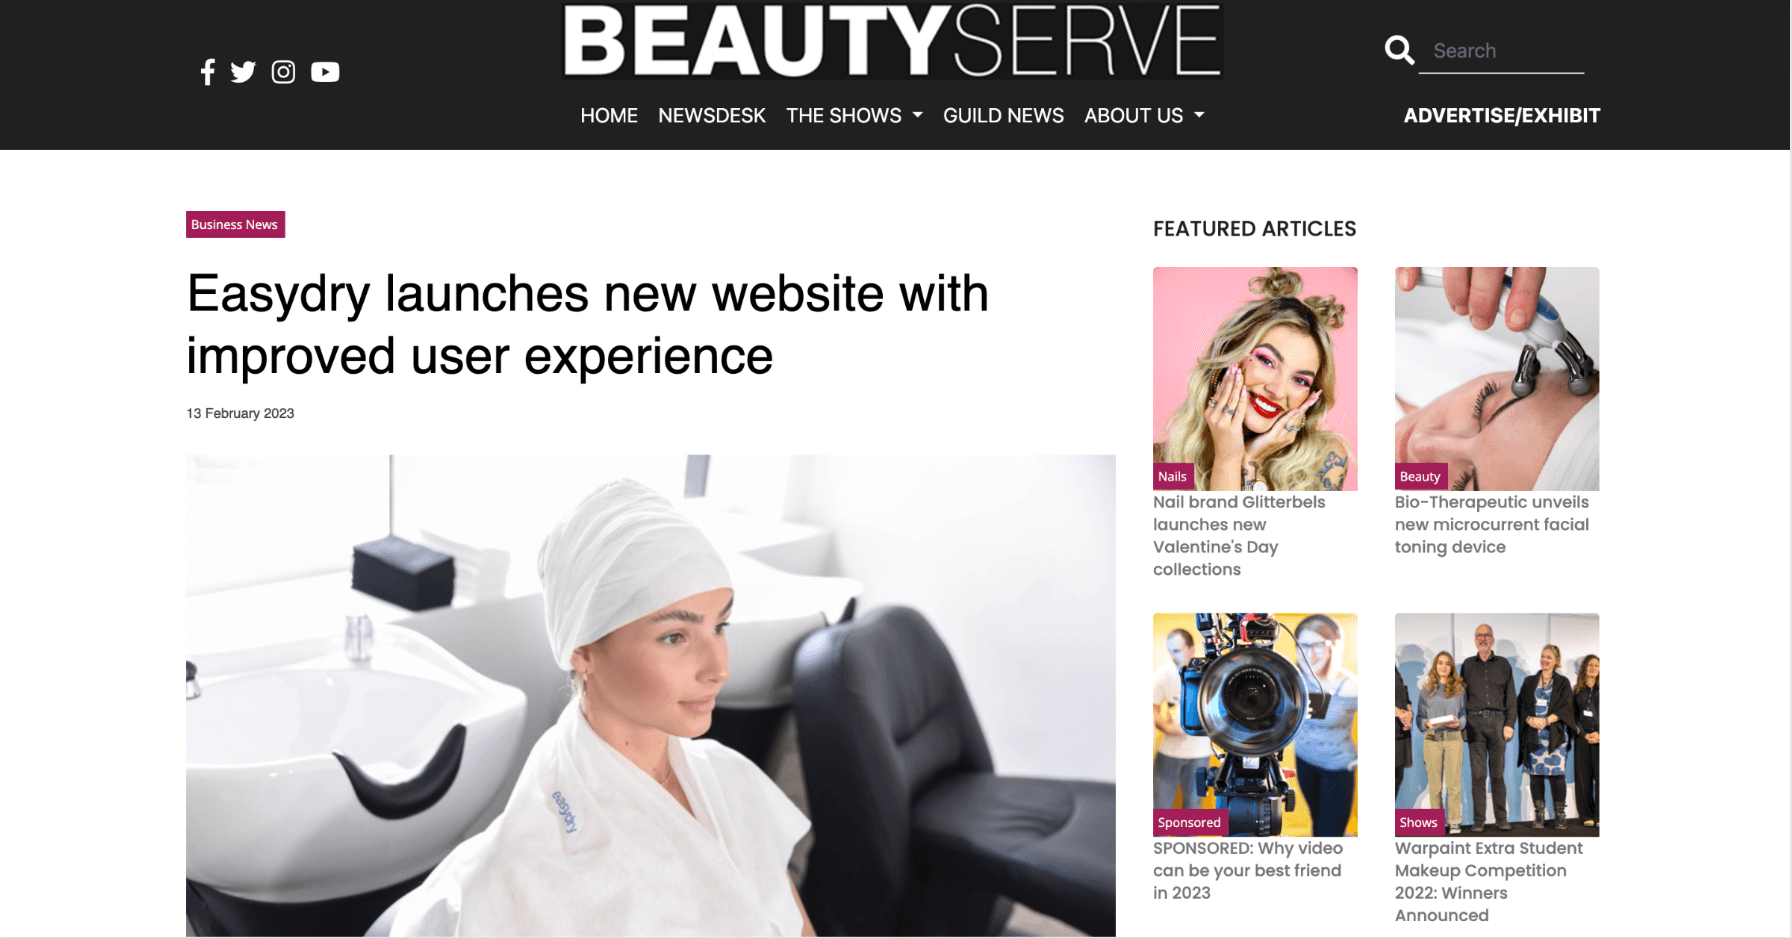 Guild News! They recently covered the launch of the new Easydry website with improved user experience. Read the coverage here.